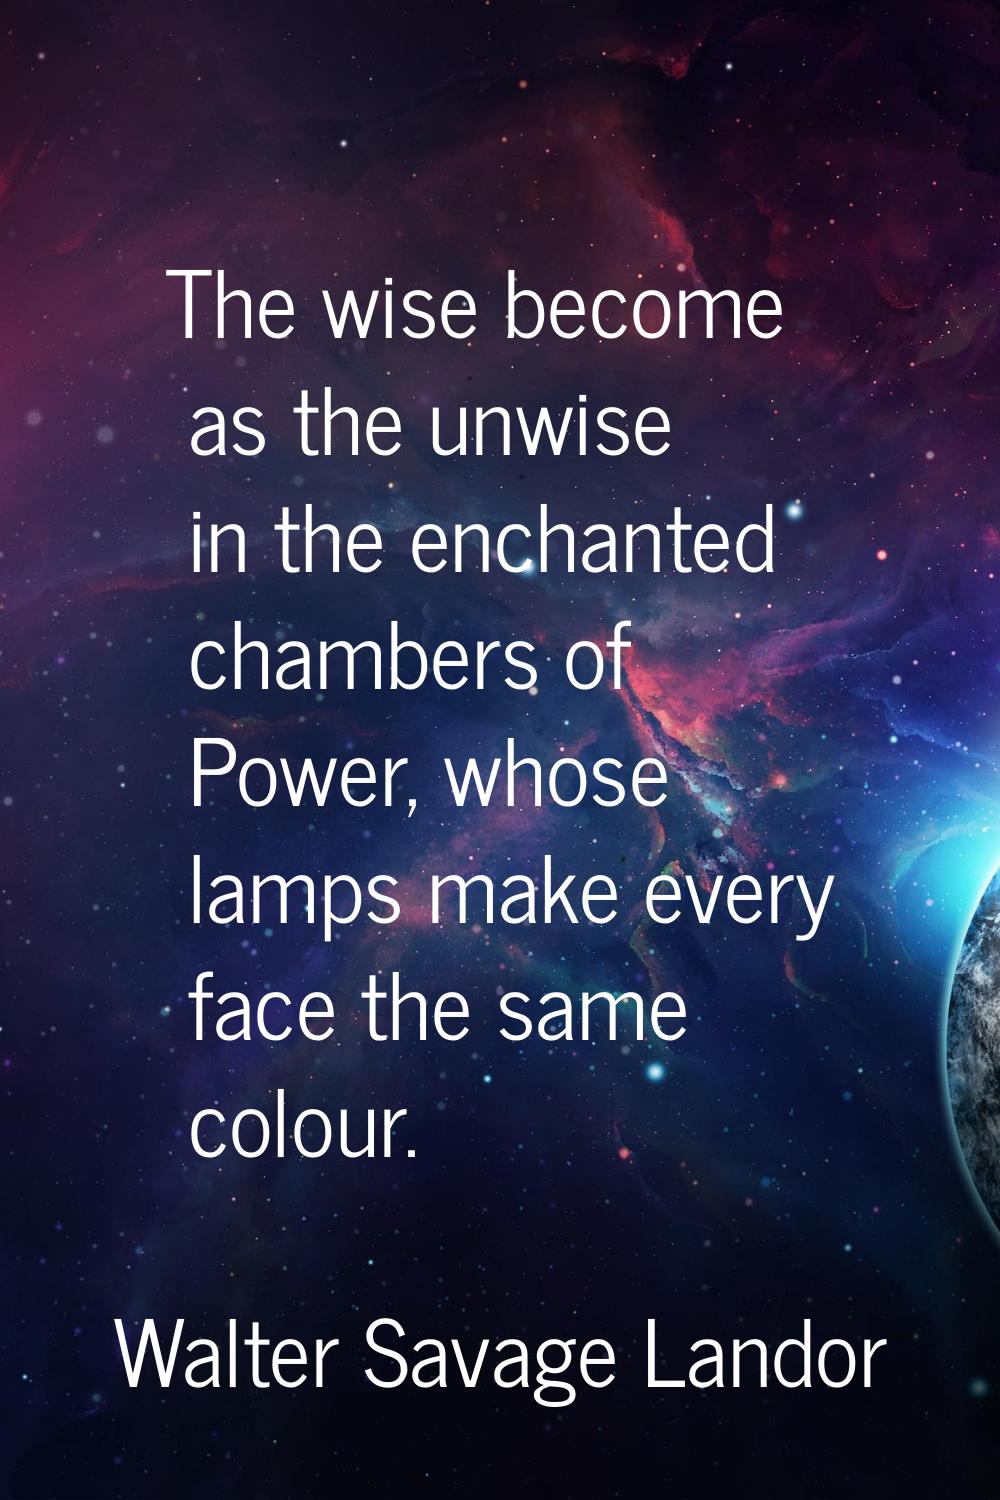 The wise become as the unwise in the enchanted chambers of Power, whose lamps make every face the s